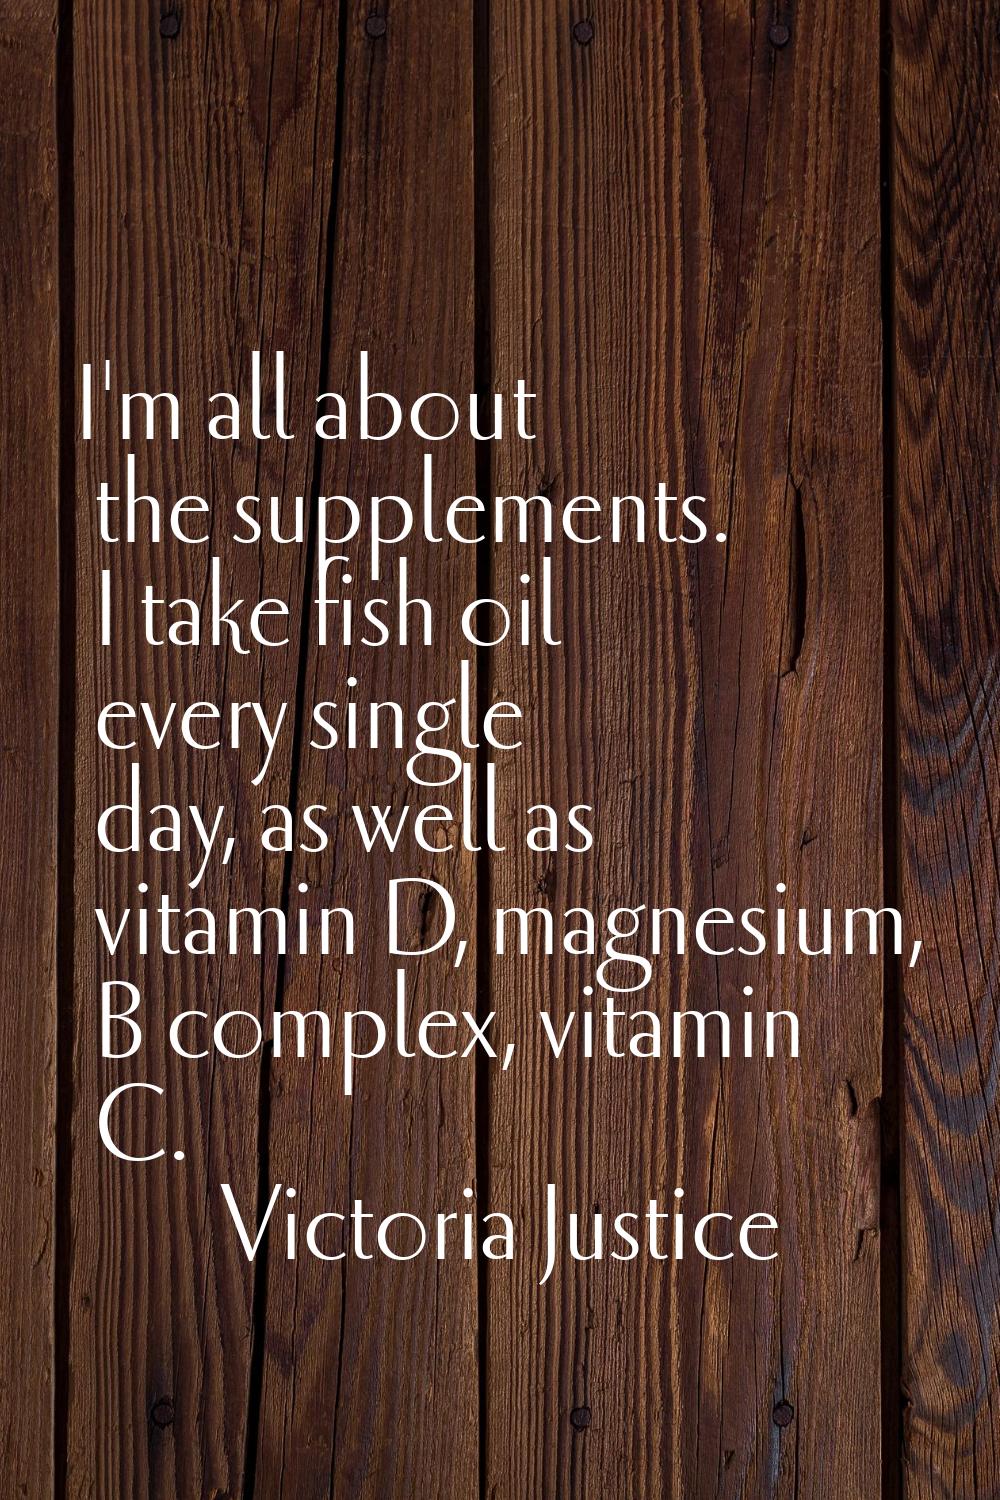 I'm all about the supplements. I take fish oil every single day, as well as vitamin D, magnesium, B